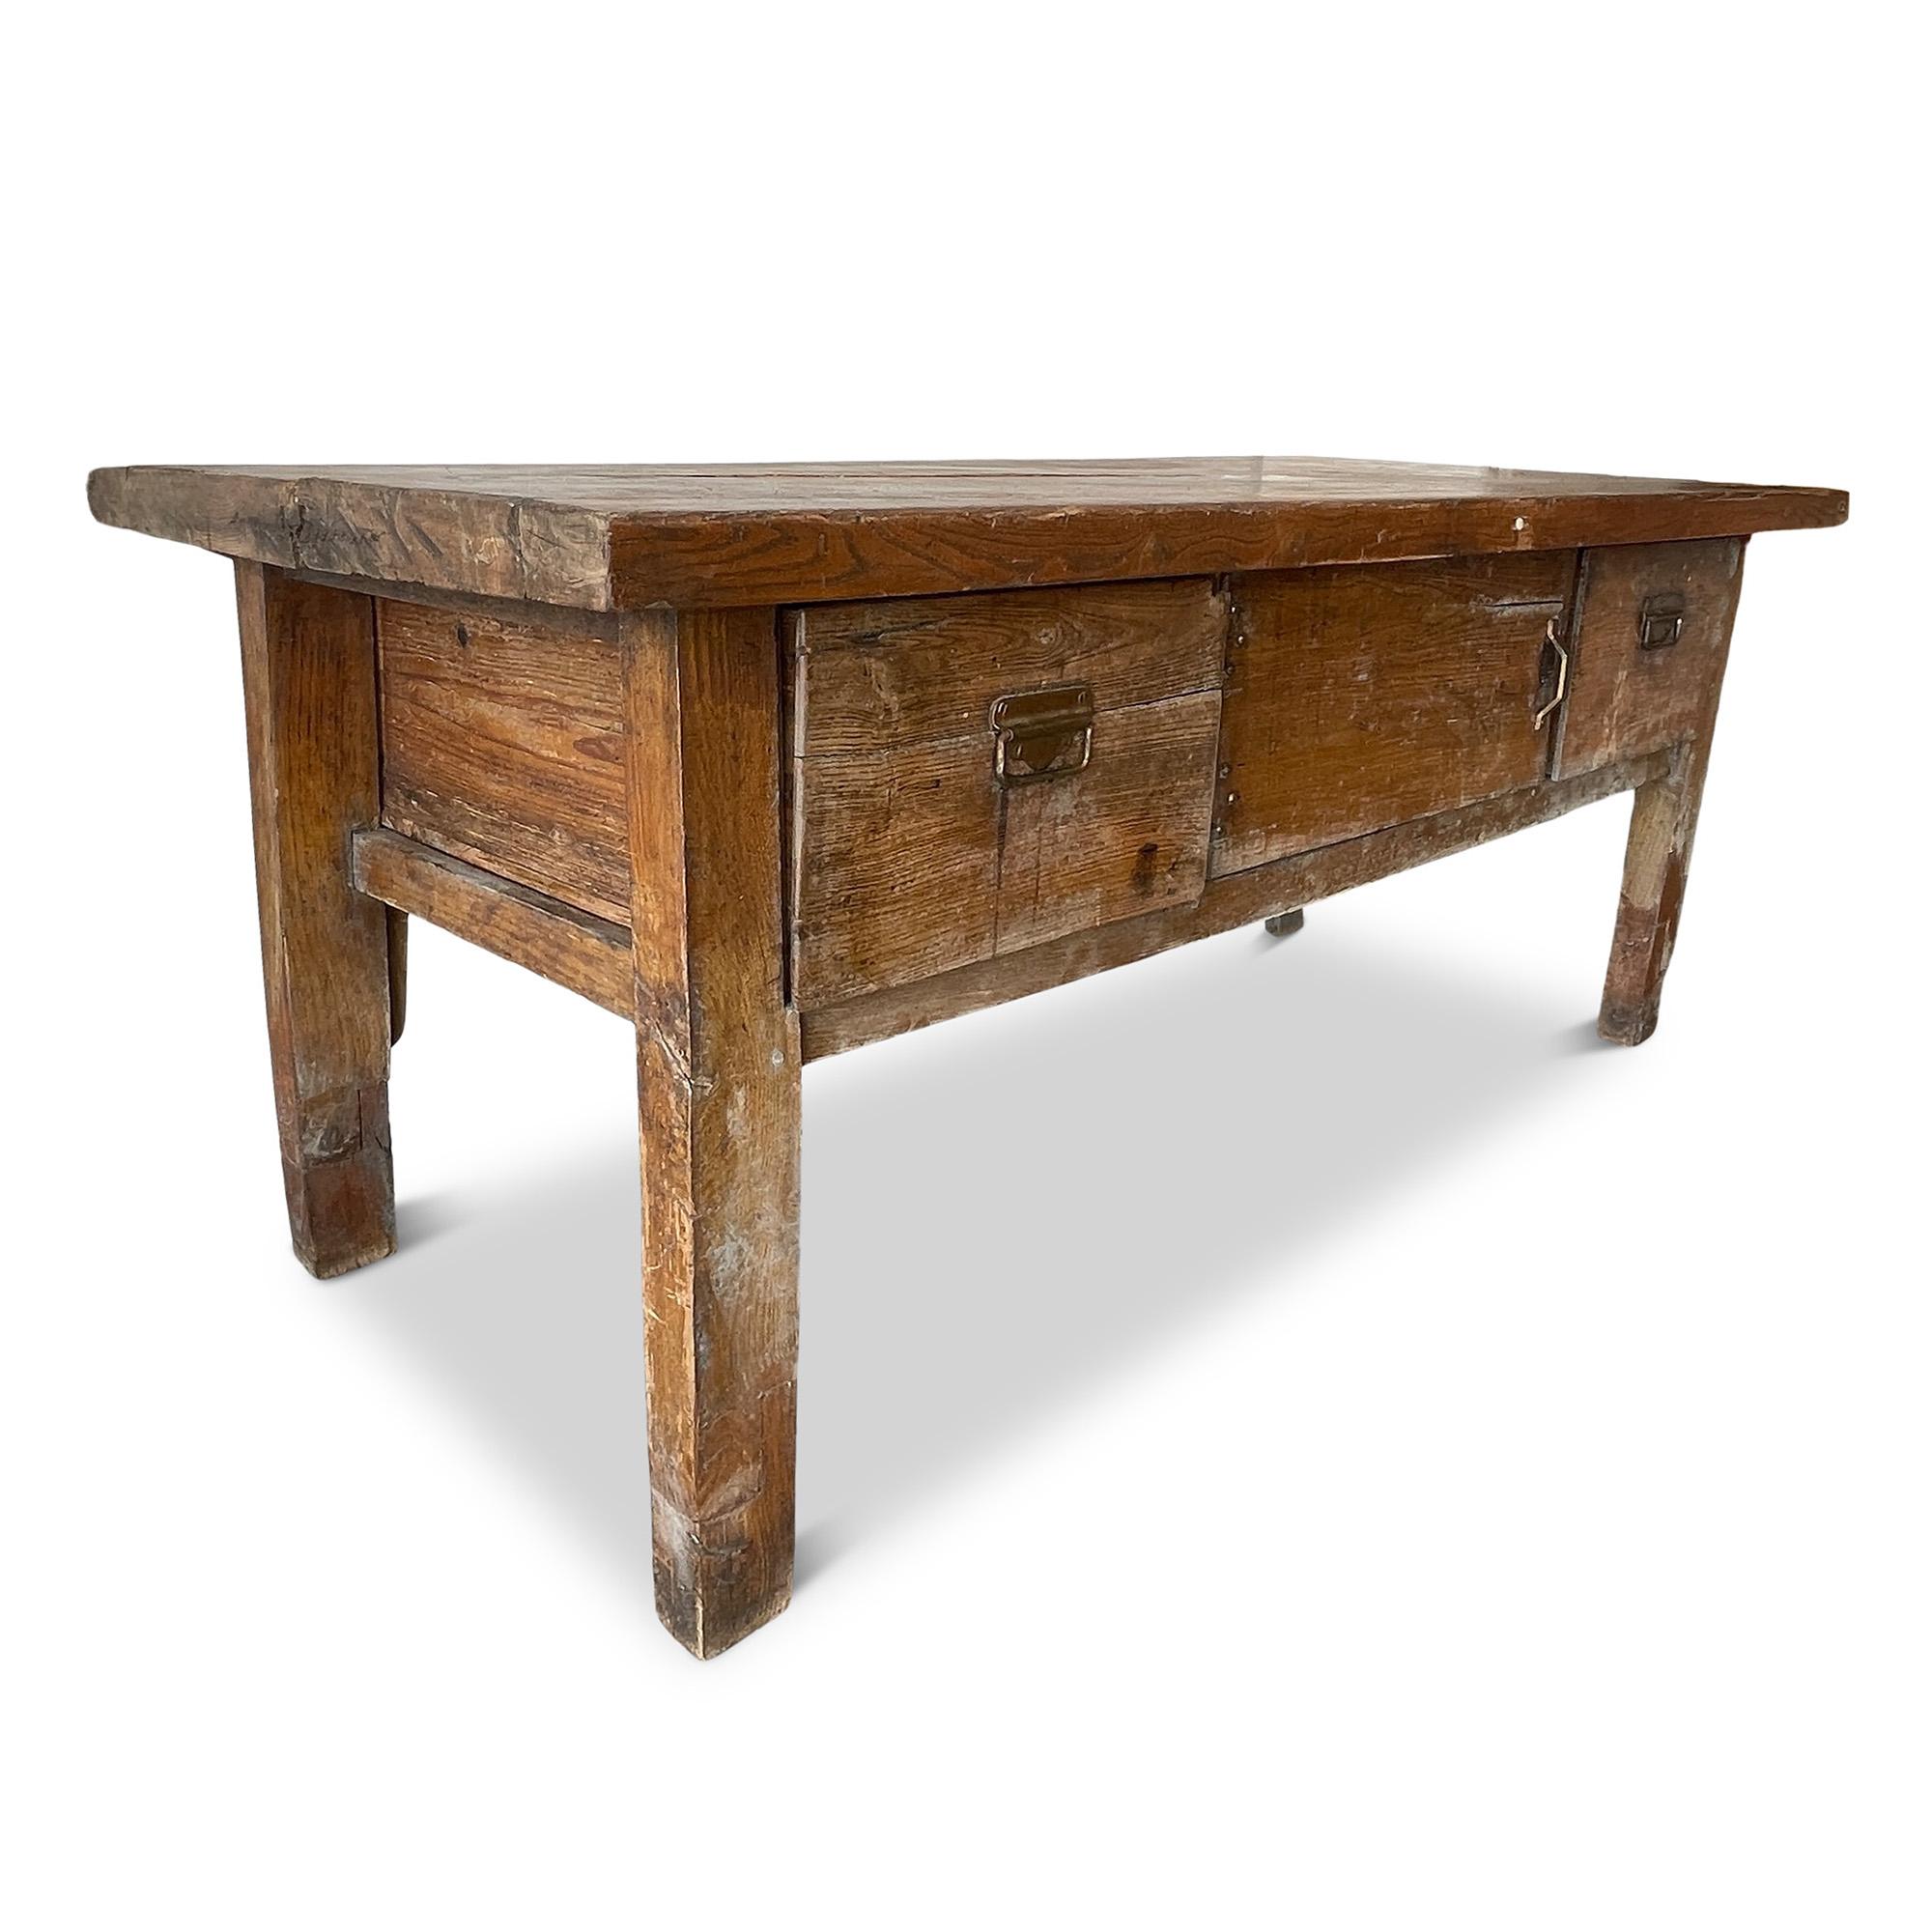 Channel 19th-century French countryside with this stunning French Console Table. Originally designed for kitchen prep, cooking and storage, this timeless piece doubles as a modern console or kitchen and dining sideboard. We love seeing it as an